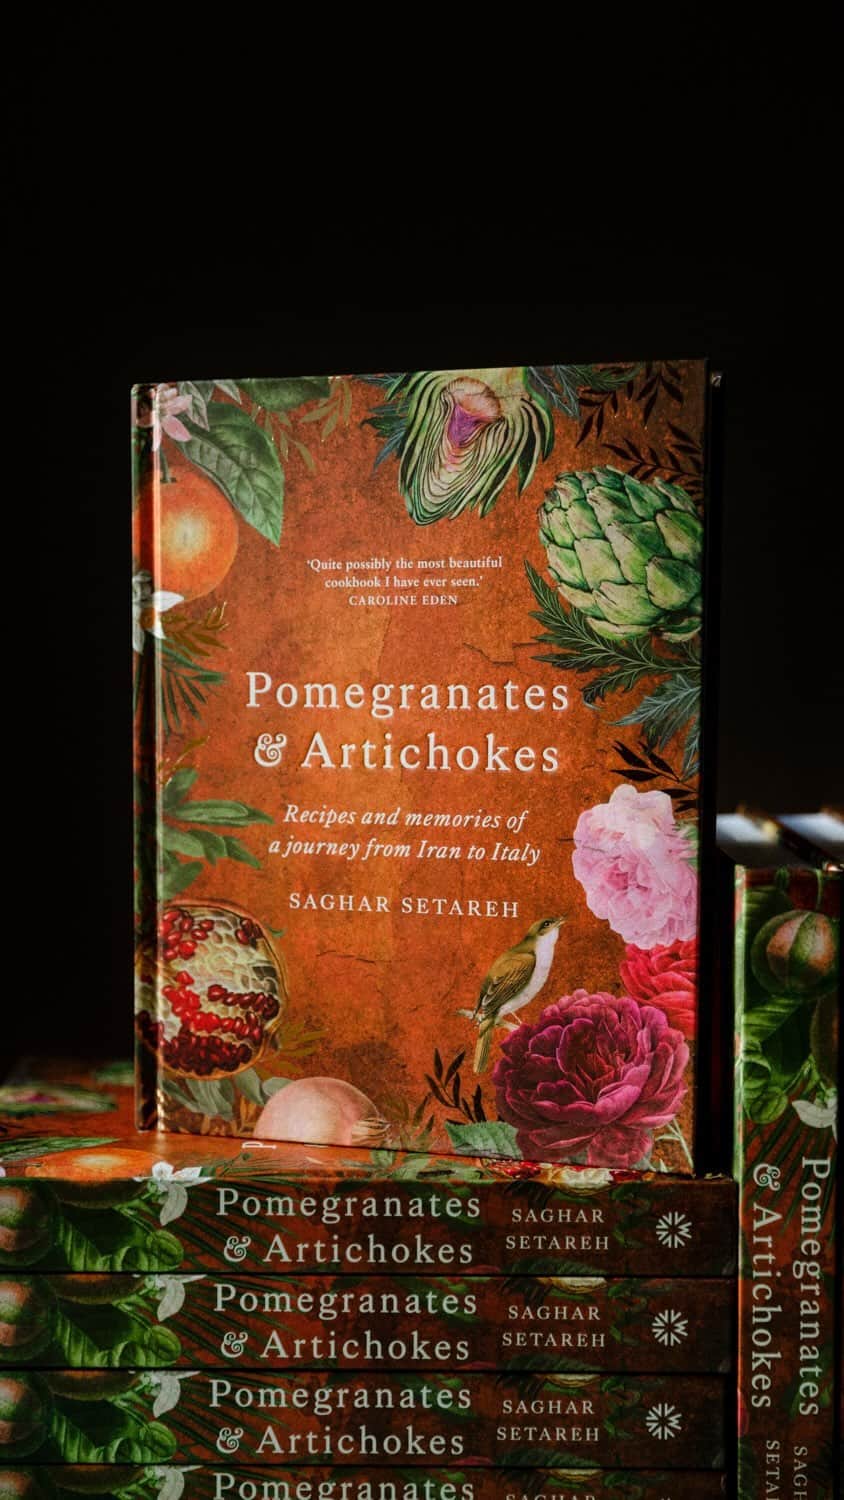 Saghar Setarehのインスタグラム：「It’s finally publication day! Dear world, please meet Pomegranates & Artichokes, recipes and memories of a journey from Iran to Italy.   I have talked long about what this book is and I’ll probably talk even more about it now that it’s finally out in the world, but today I want to talk about the unbelievably amazing and talented team of people who made the existence of this book possible.  Many thanks to everyone at @murdochbooks_uk / @murdochbooks, my dear publishers @corinne_rob and Céline Hughs, my editor @katrihilden, the anazing @jemma.plus.books and everyone else at the editorial and design team for making all of book dreams come true, thank you.   I’m forever grateful to @grassnbones for all the recipes testing together in the longs winter of the pandemic, to @alice.adamscarosi for cooking the food in the book so beautifully with the help of @bettirosso. Many thanks to @valentinahortus for infinite help and having been an extra pair of hands and eyes to me, and to @madonnellagricola for the hospitality and friendship.   My gratitude goes to my dear agent Victoria Hobbs at @a.m.heath.  Last but certainly not least, very special thanks to my dearest  @tommaso.javidi for sincere friendship, incessable support and making these beautiful, beautiful videos for Pomegranates & Artichokes.   And of course, thanks to all of you who have pre-preordered the book, or are planning to purchase it now, and thanks for all the kindness and support you’ve shown me. I hope you’ll enjoy the book.   #PomegranatesAndArtichokes #LabNoonCookbook #FlavorsAndEncouters」